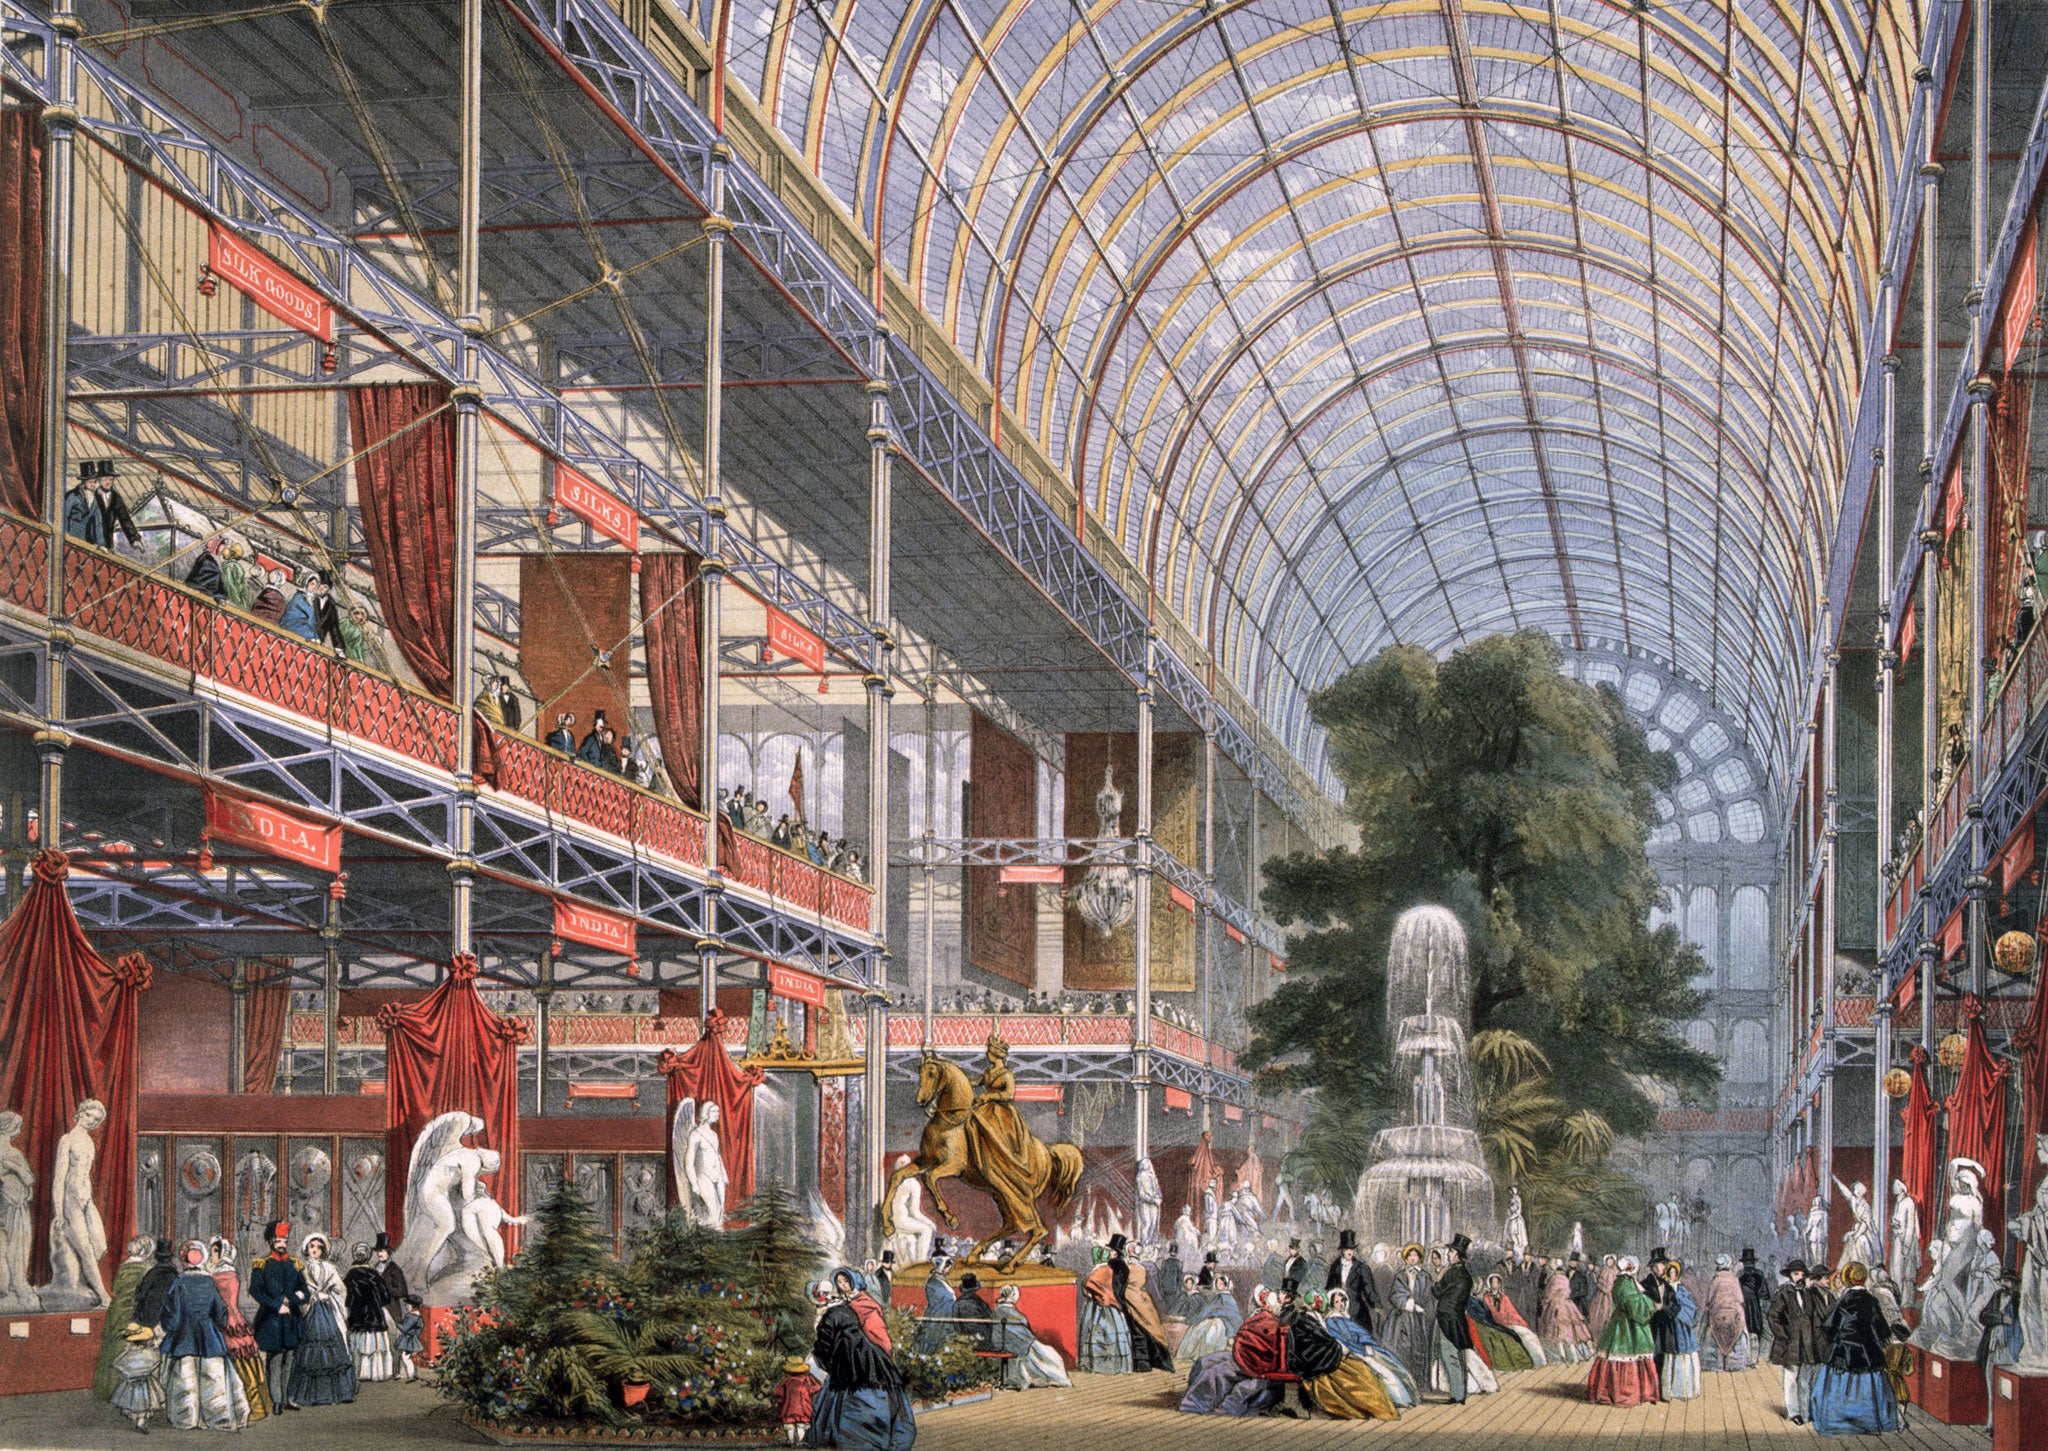 Remembrance of times past: Joseph Paxton's Crystal Palace at Hyde Park in 1851